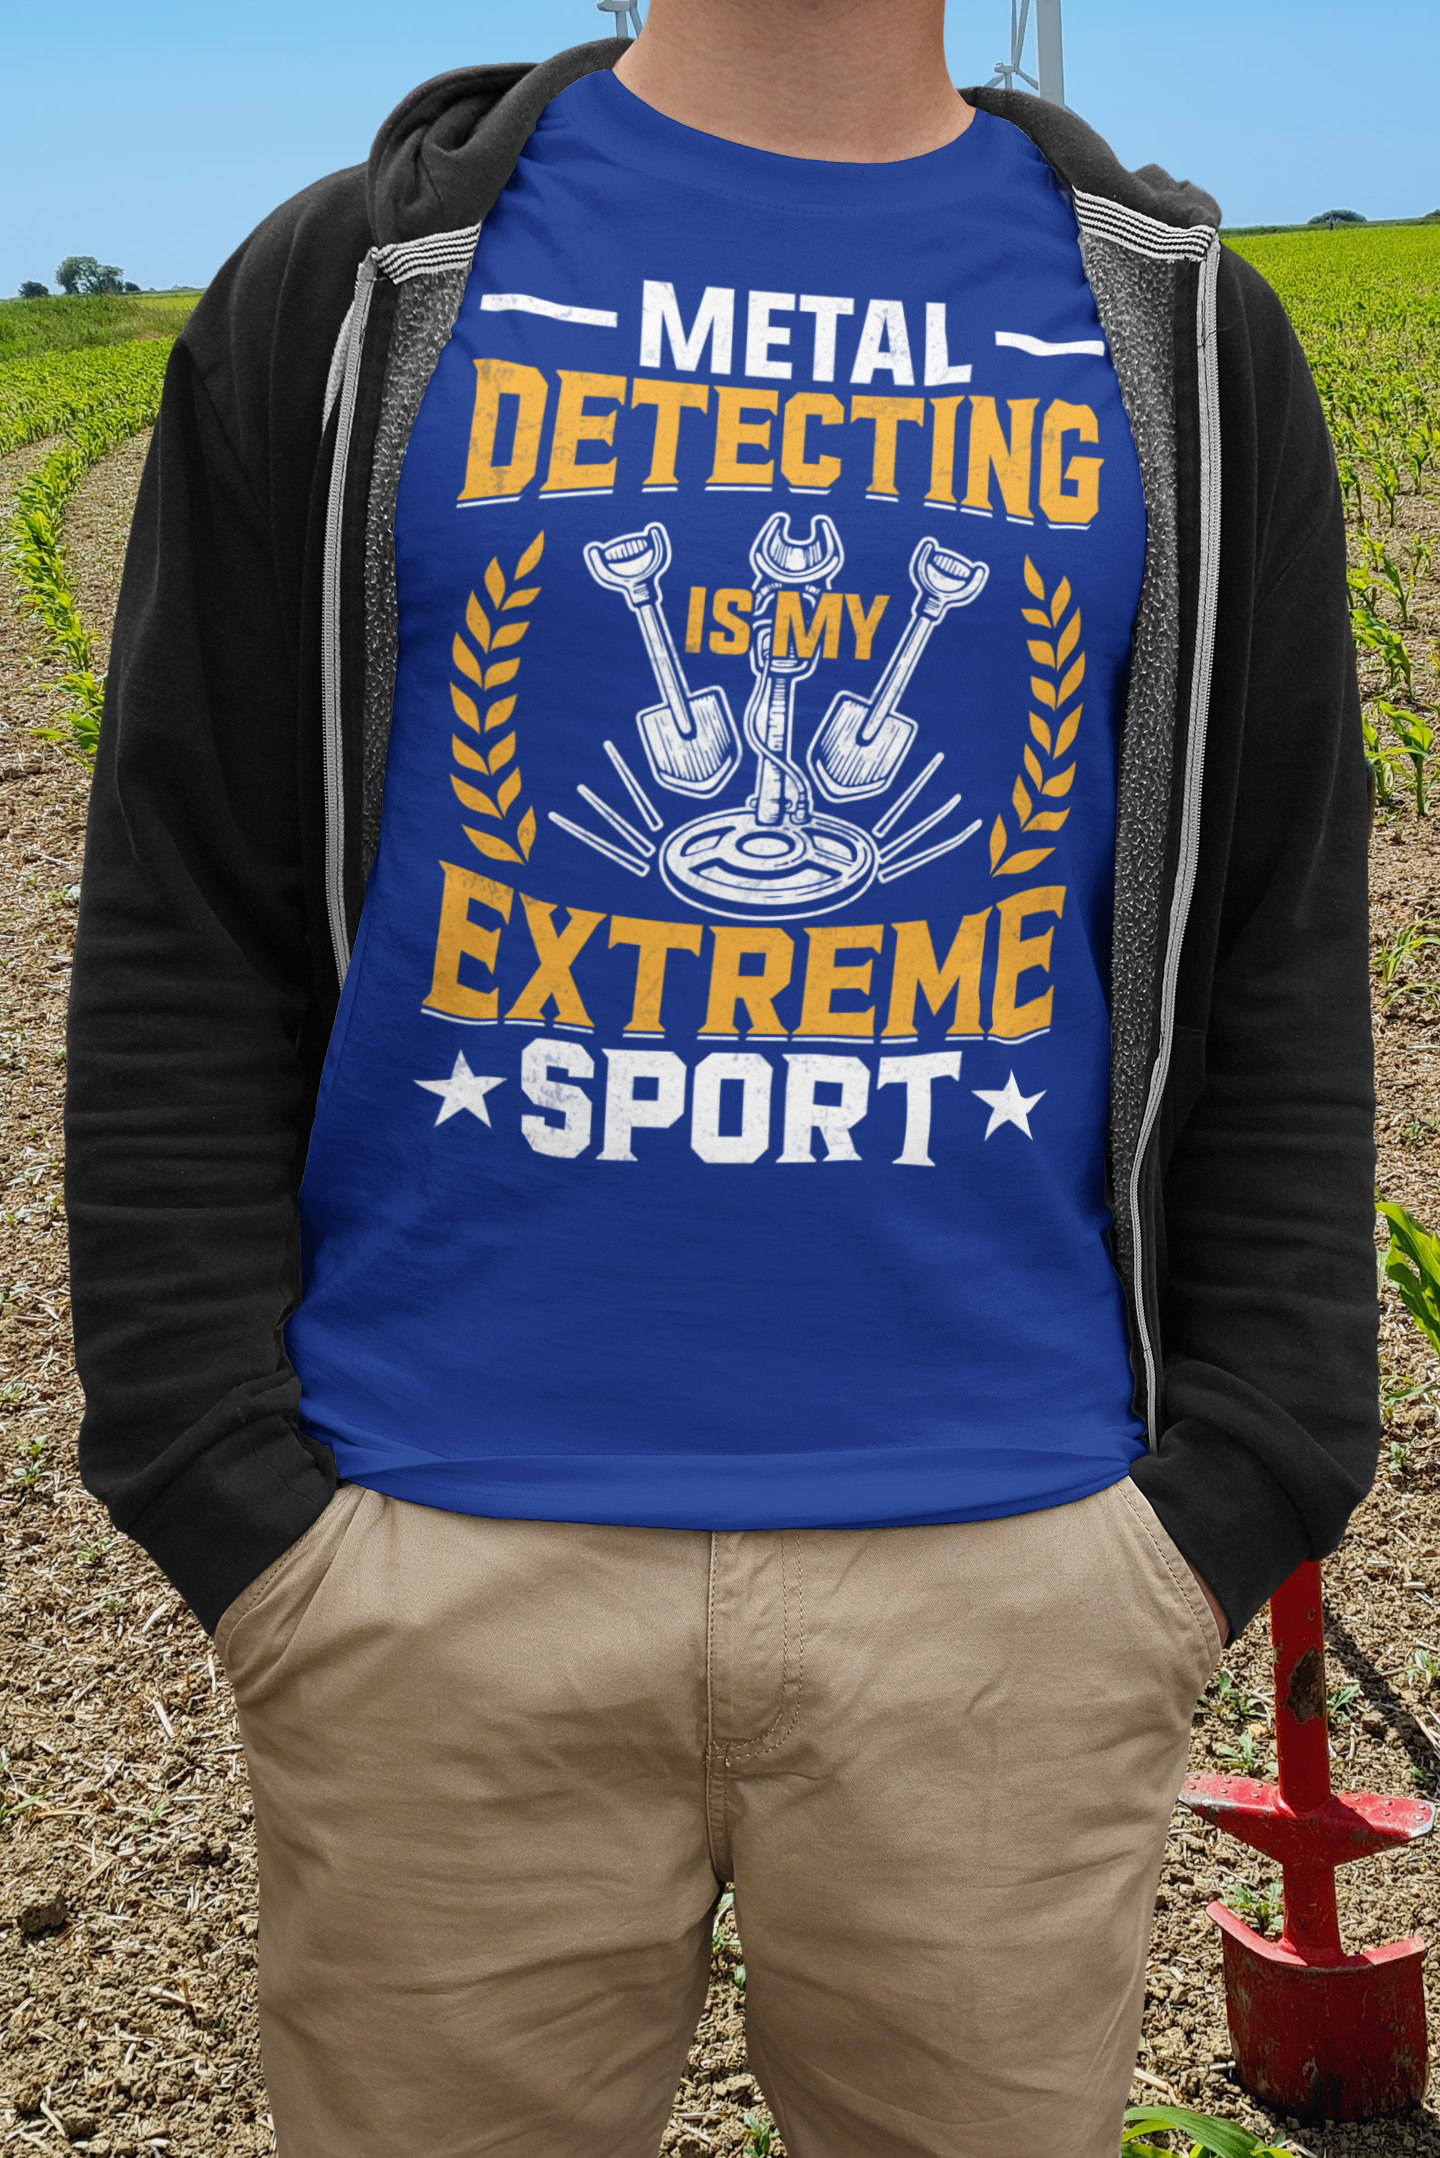 Metal detecting is my extreme sport